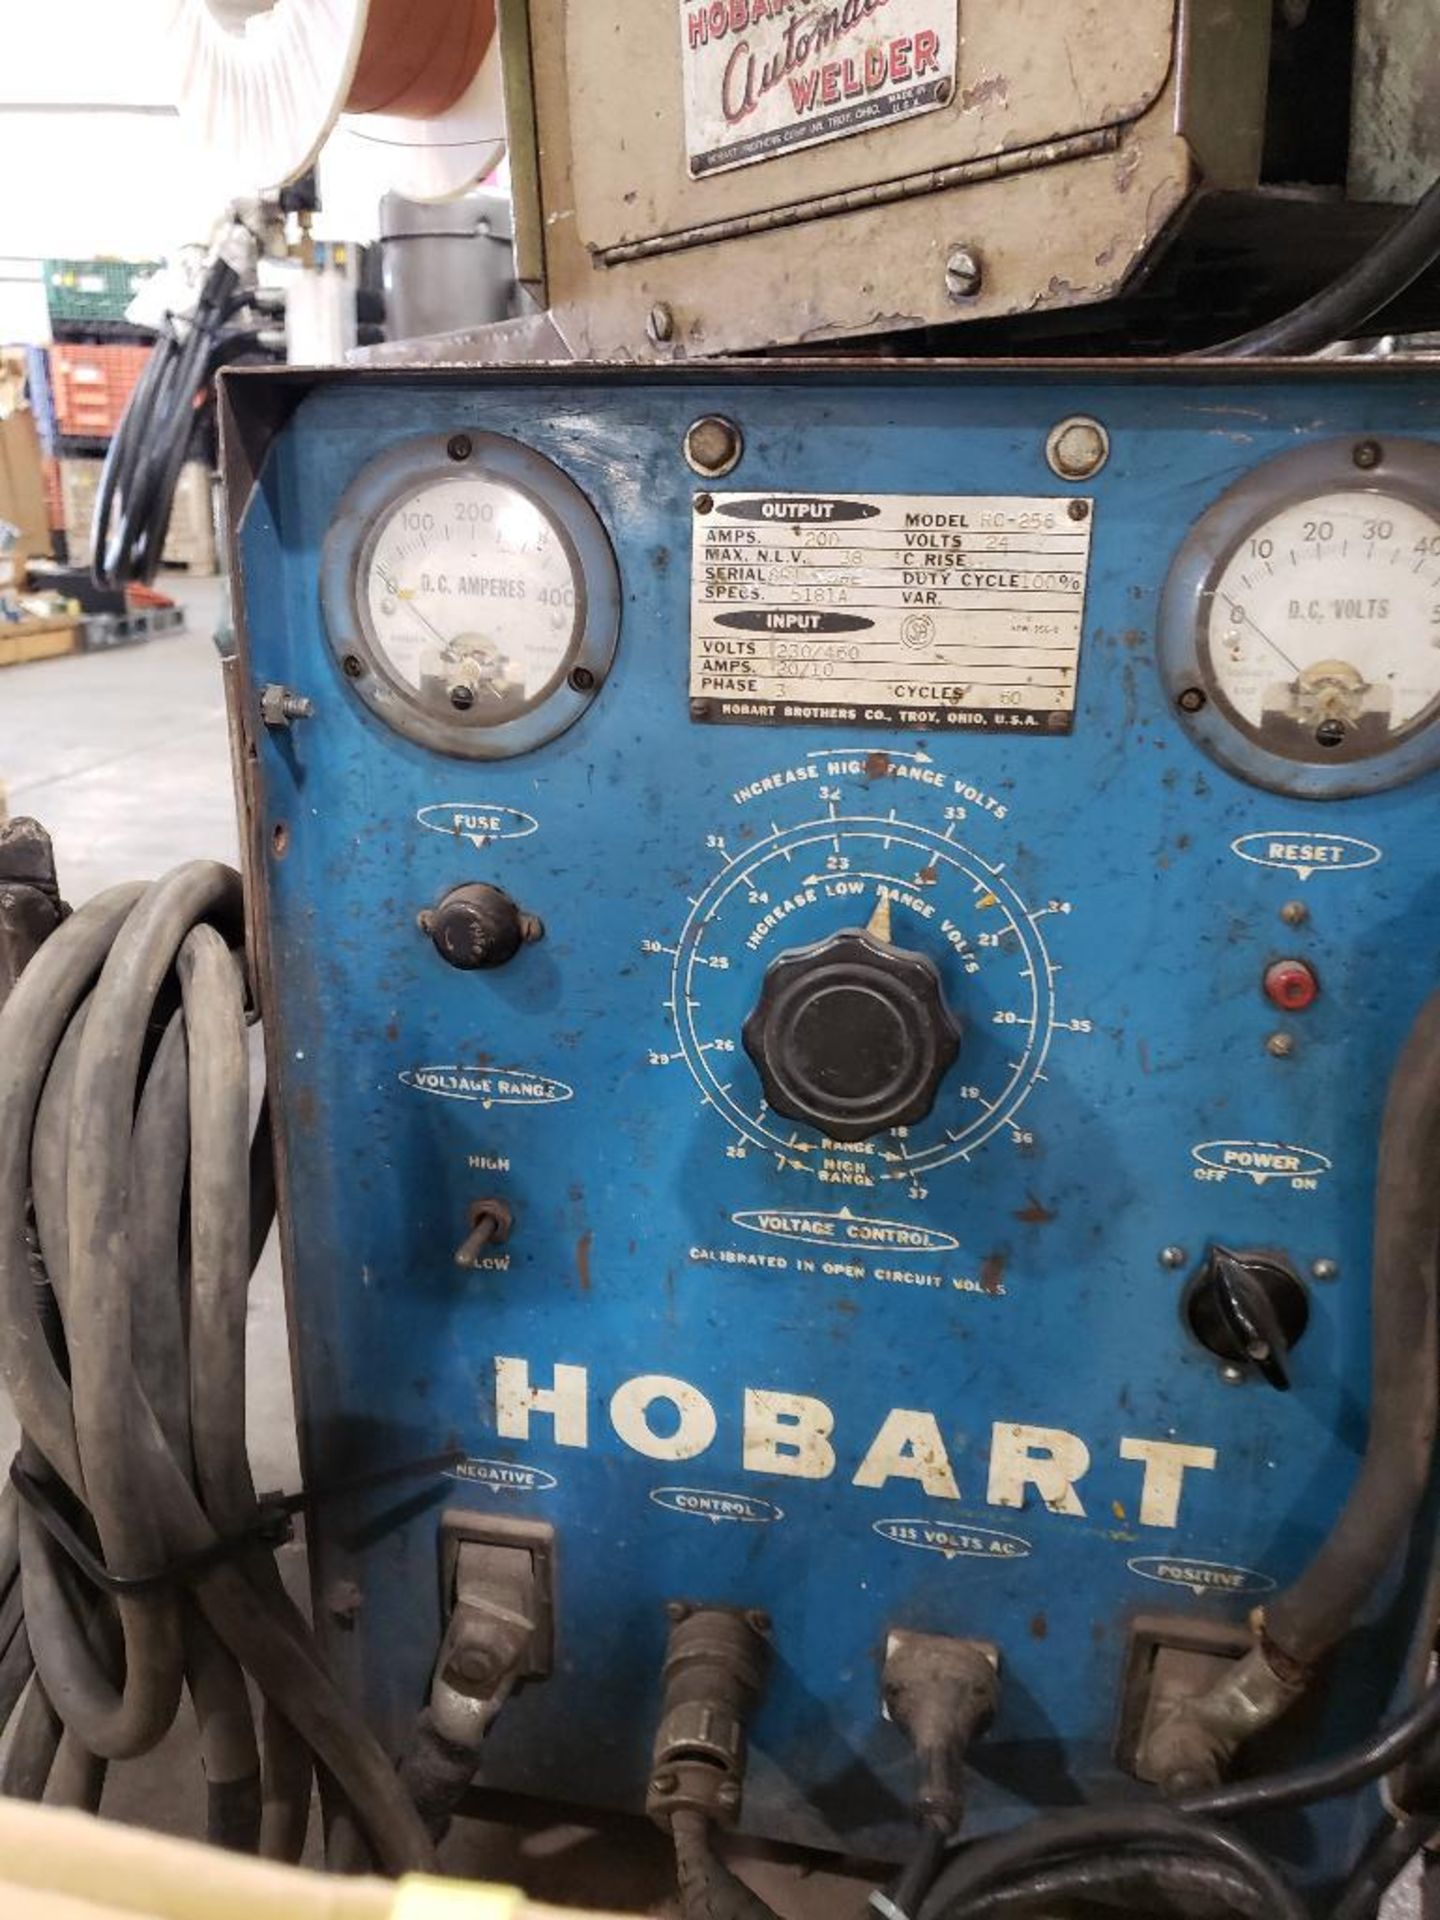 Hobart welder. Model RC-256. 200amp with MIGARC welding head. MOdel AGH-27. - Image 5 of 10